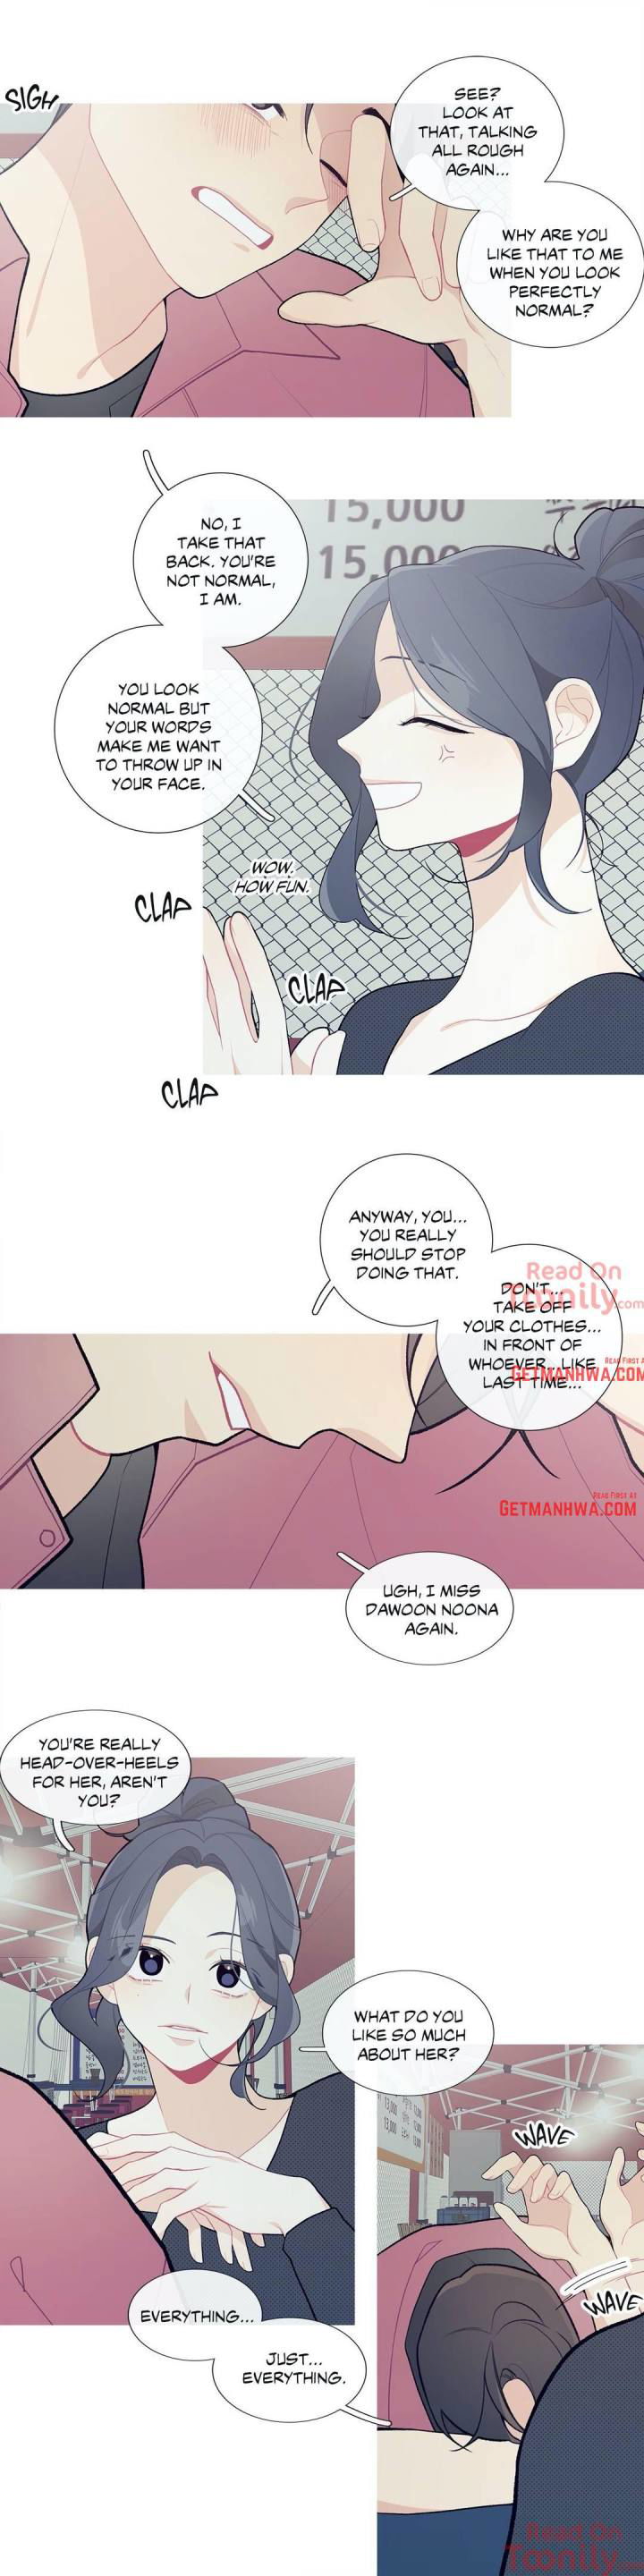 whats-going-on-chap-35-7